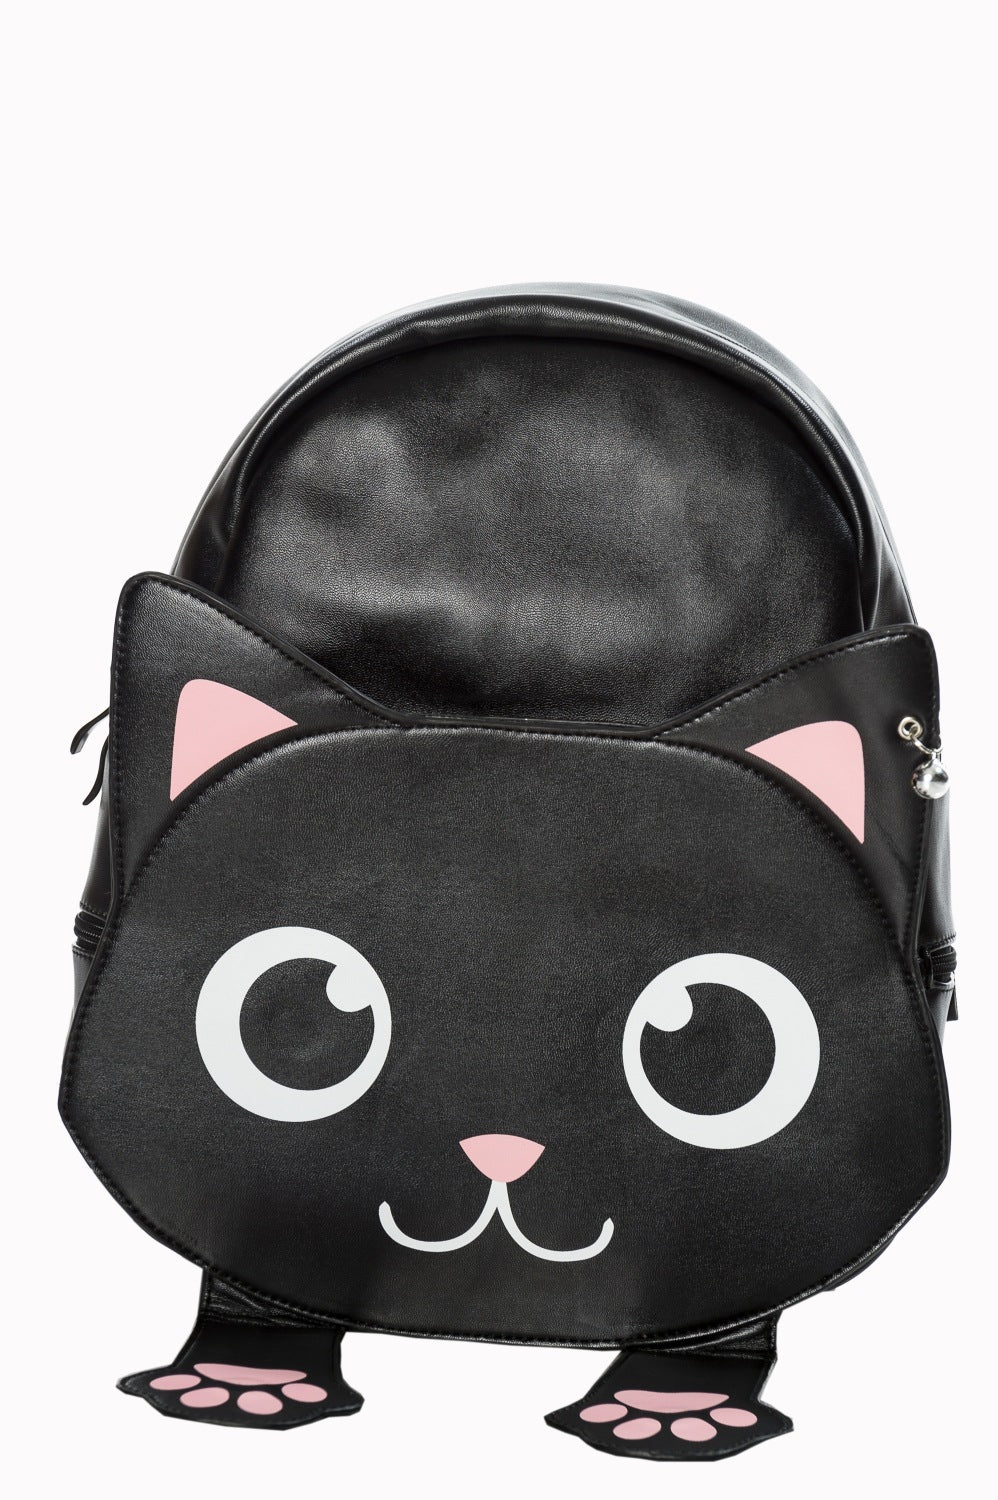 Cat face back pack showing full face